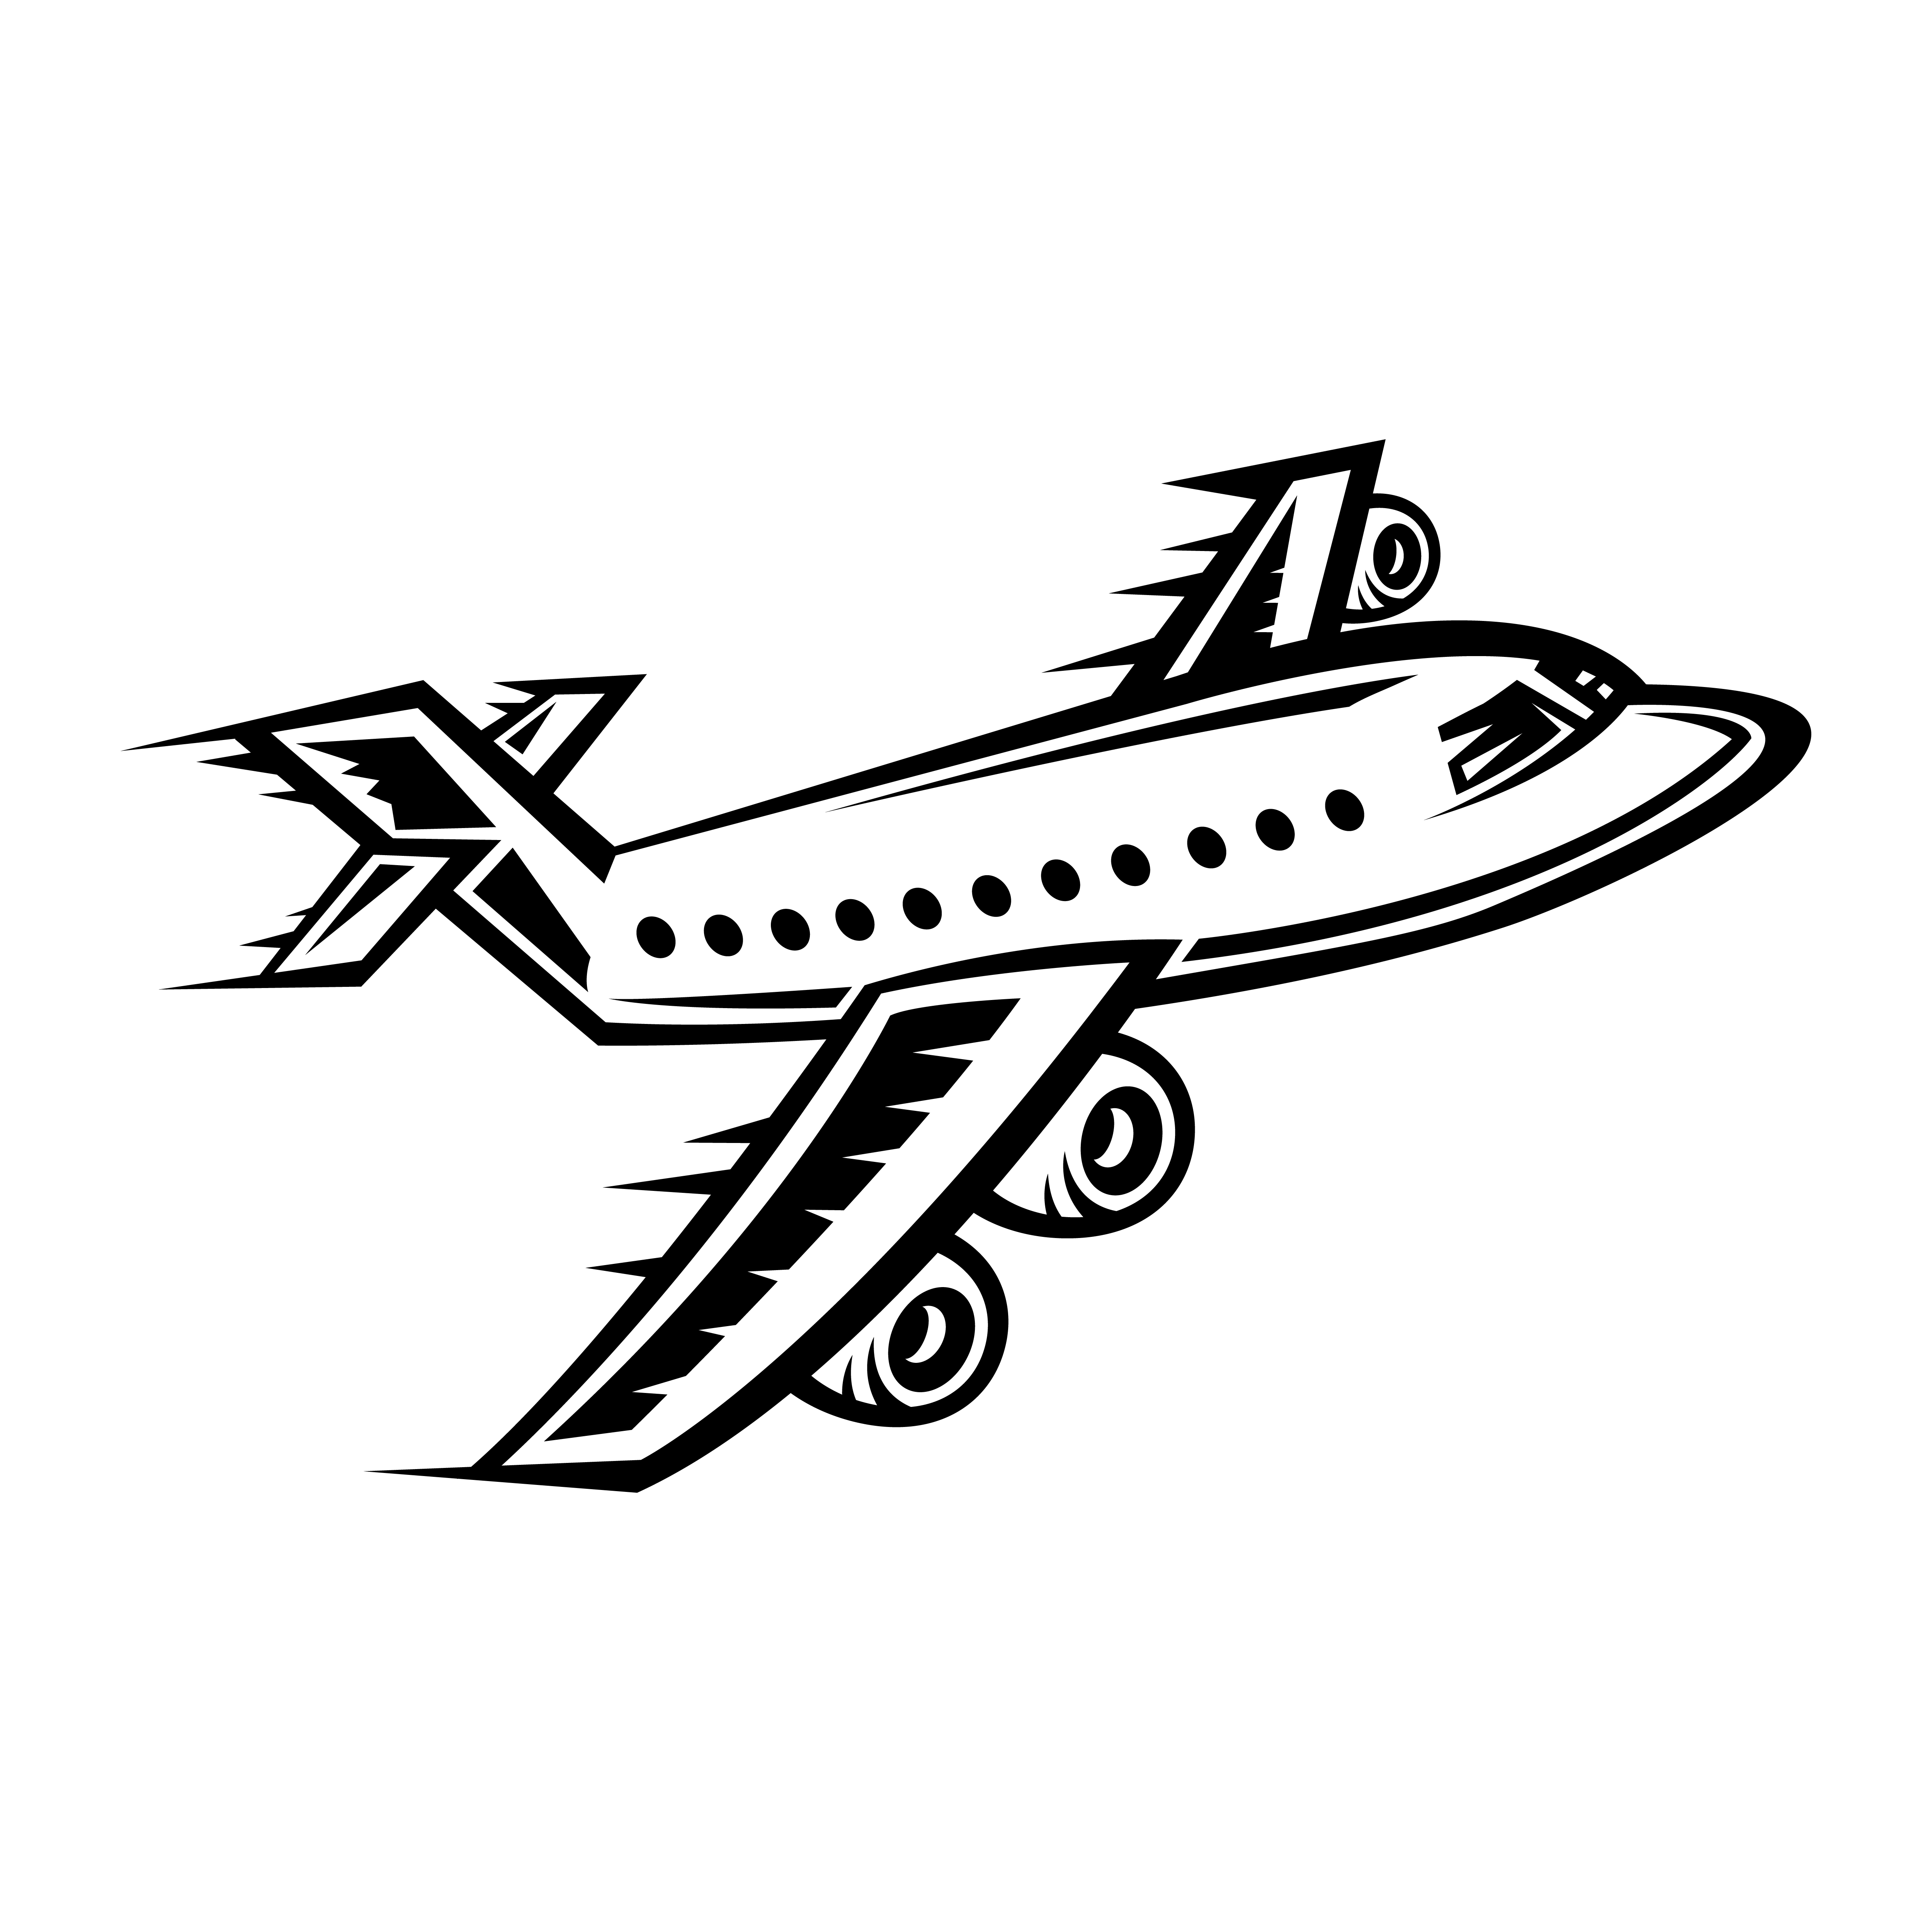 Download Airplane Flying Vector Icon - Download Free Vectors ...